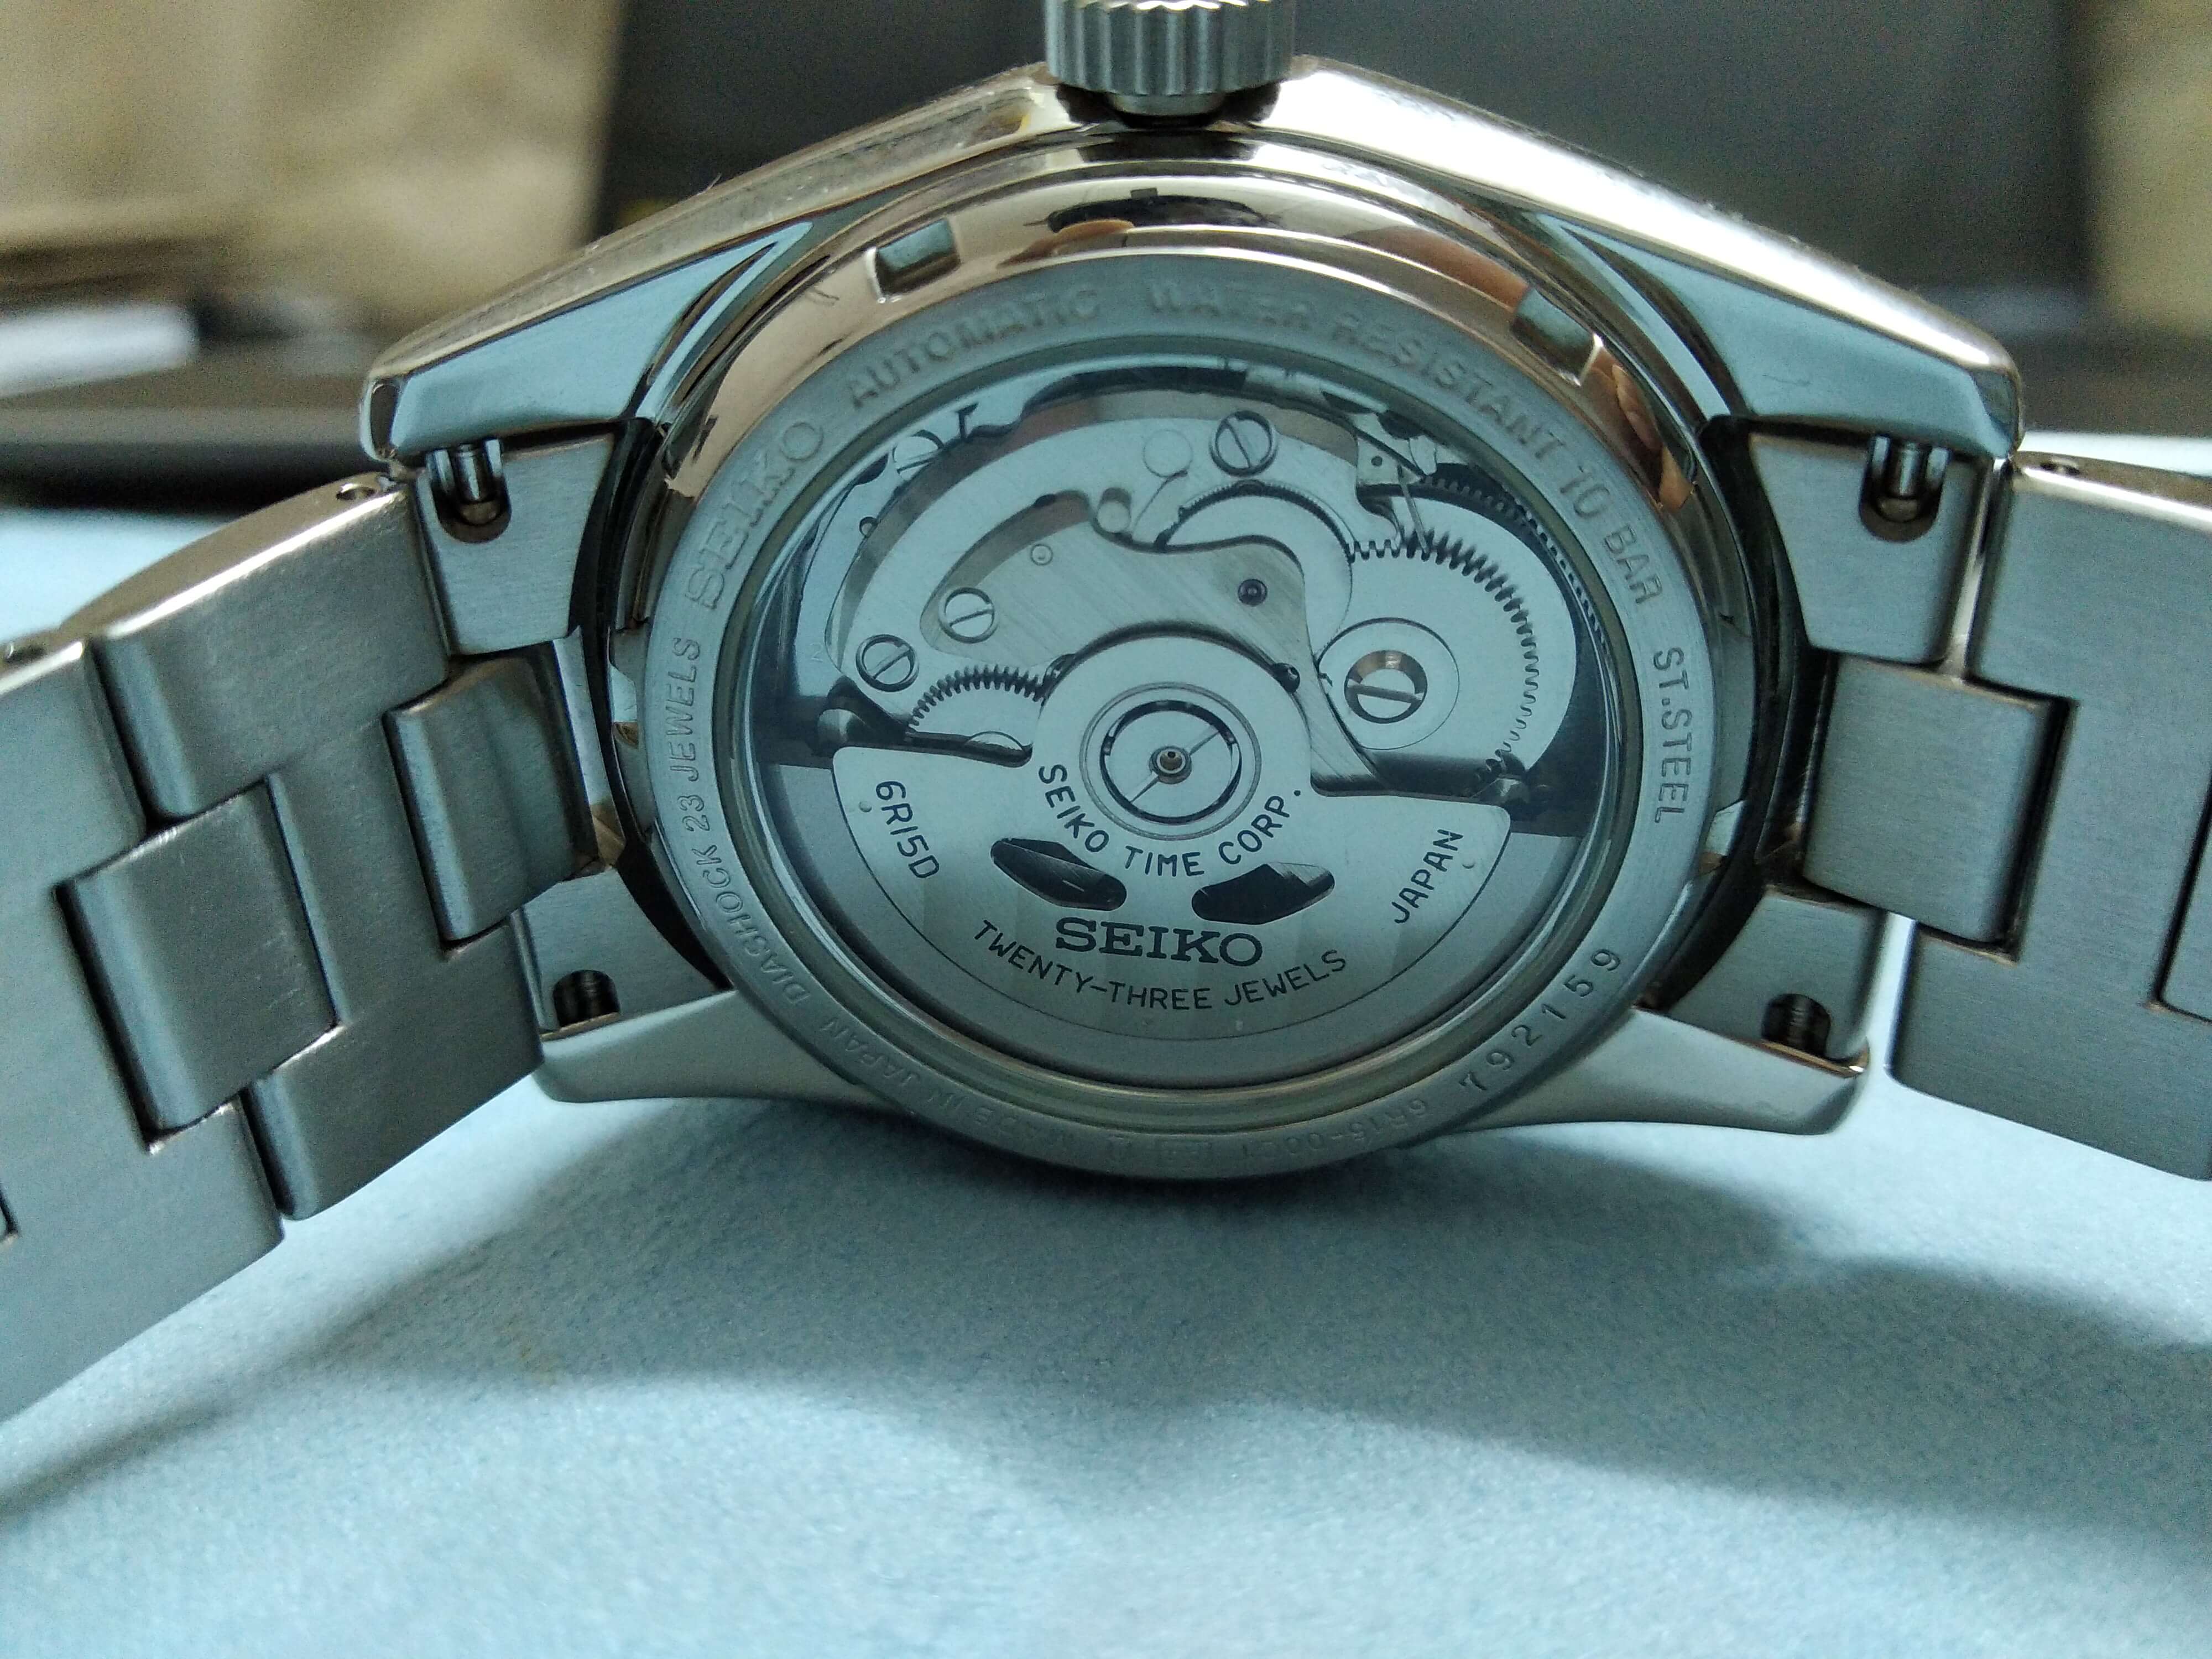 New Sarb035 - Help with stain in the movement? | WatchUSeek Watch Forums